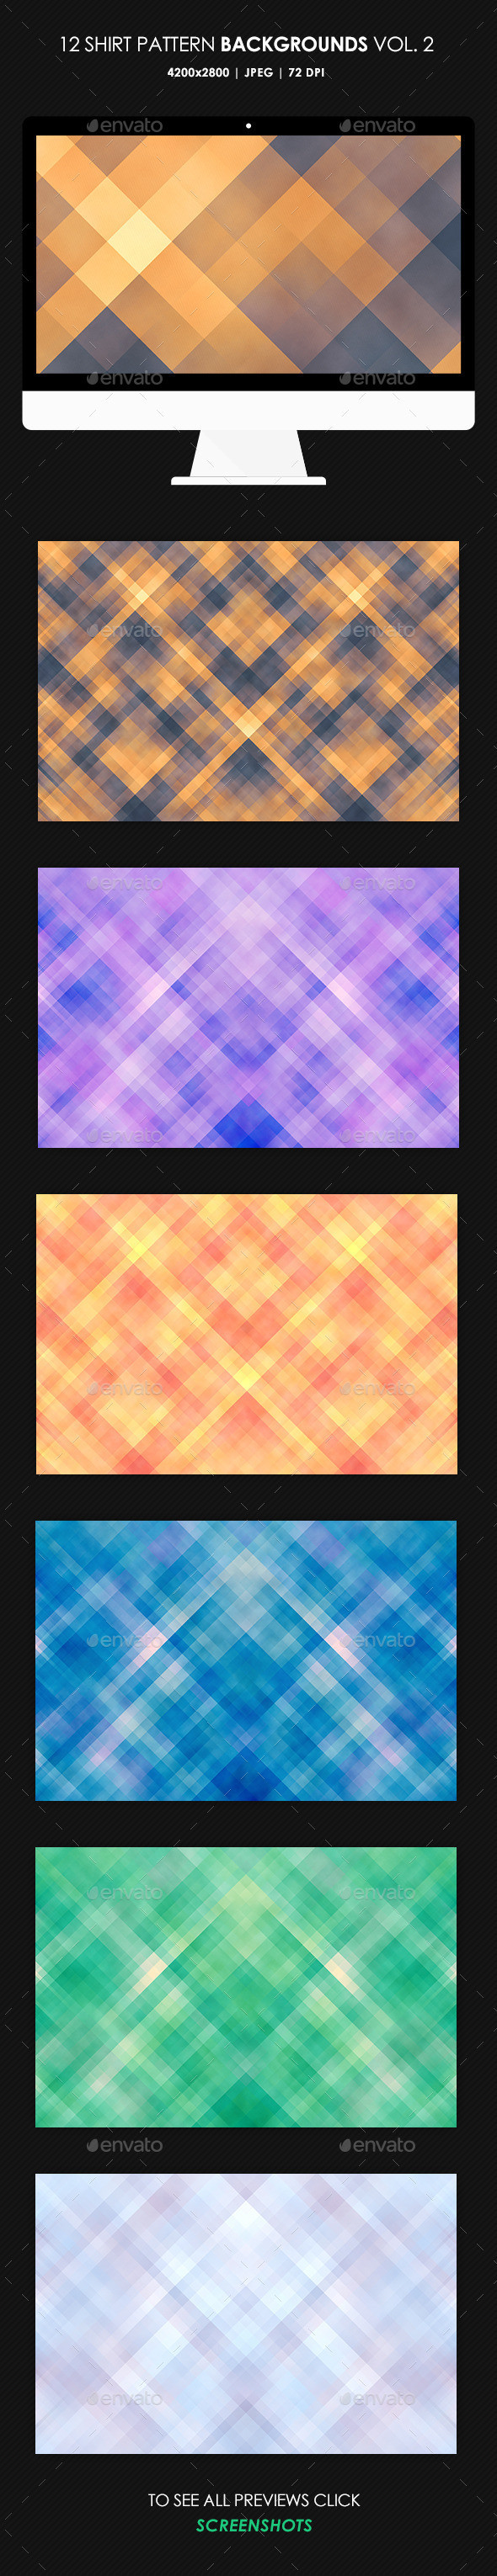 Shirt pattern bgs preview